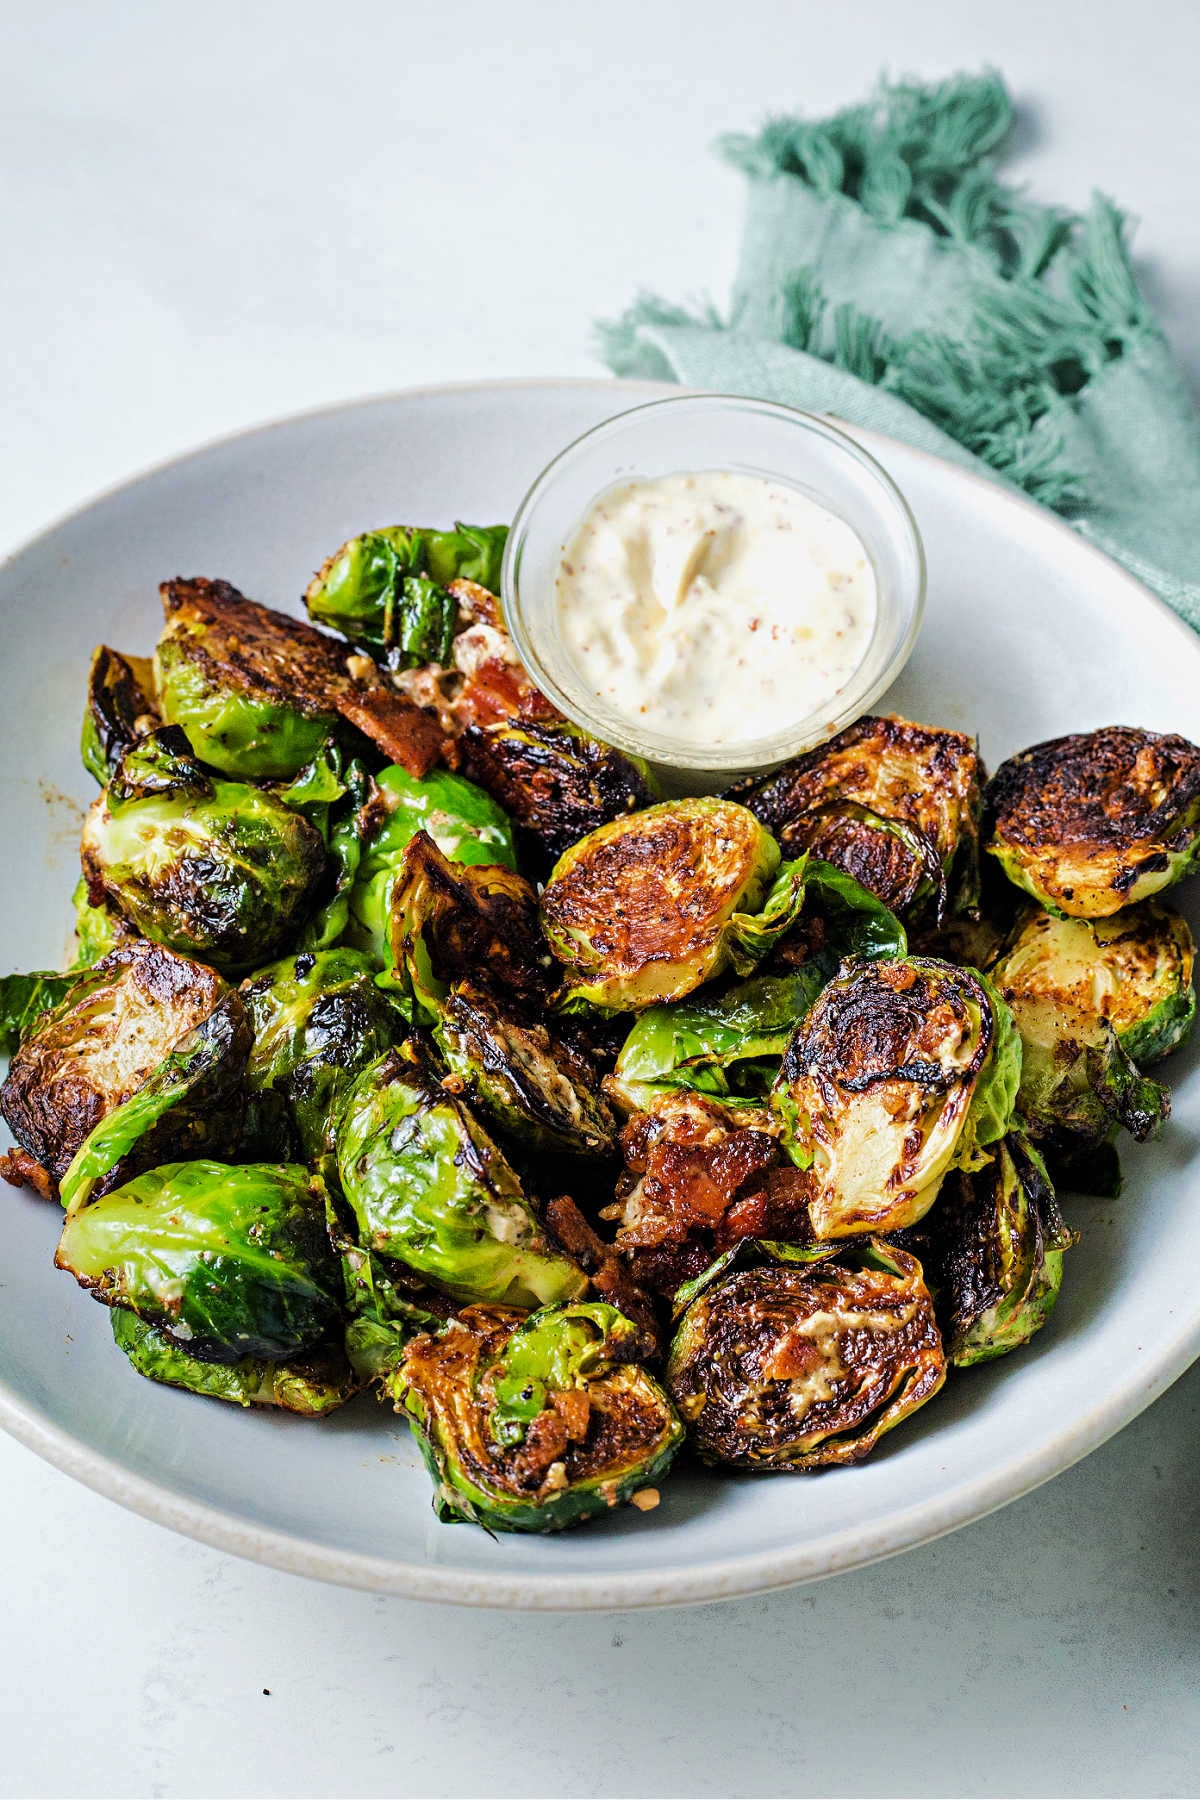 caramelized brussels sprouts in a white serving bowl with a a side of garlic aioli on a table.